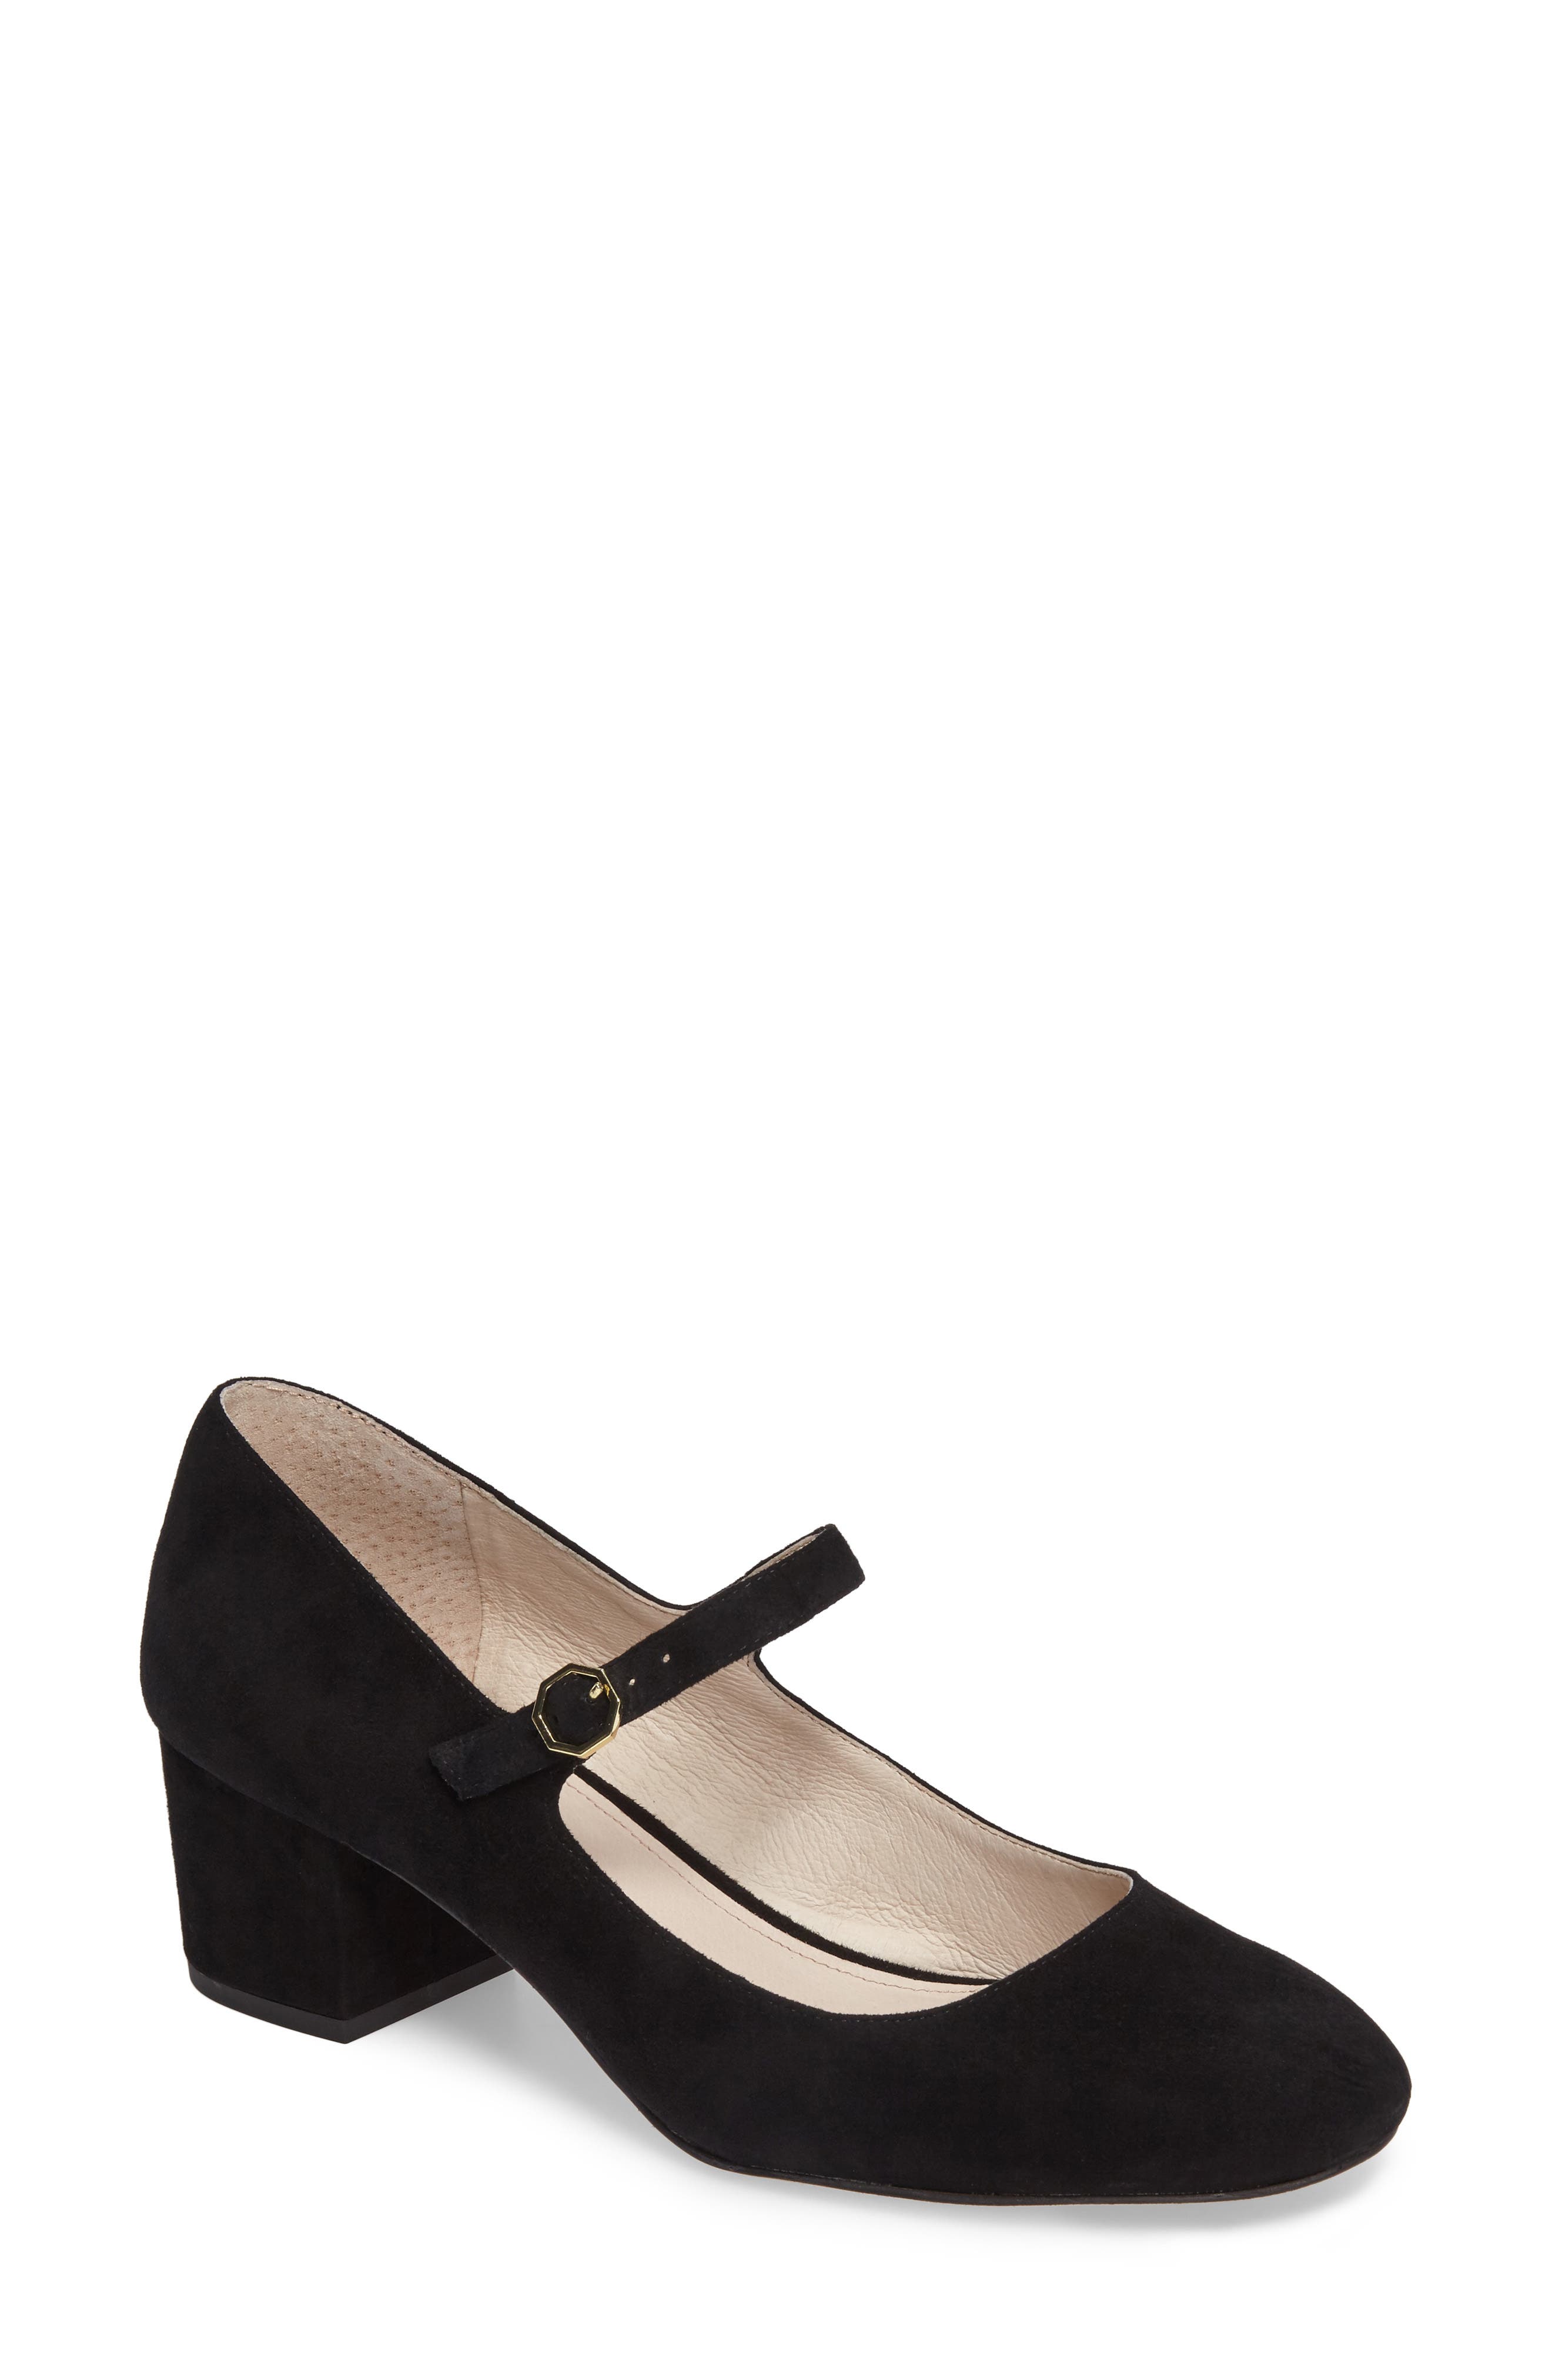 nordstrom mary jane pumps